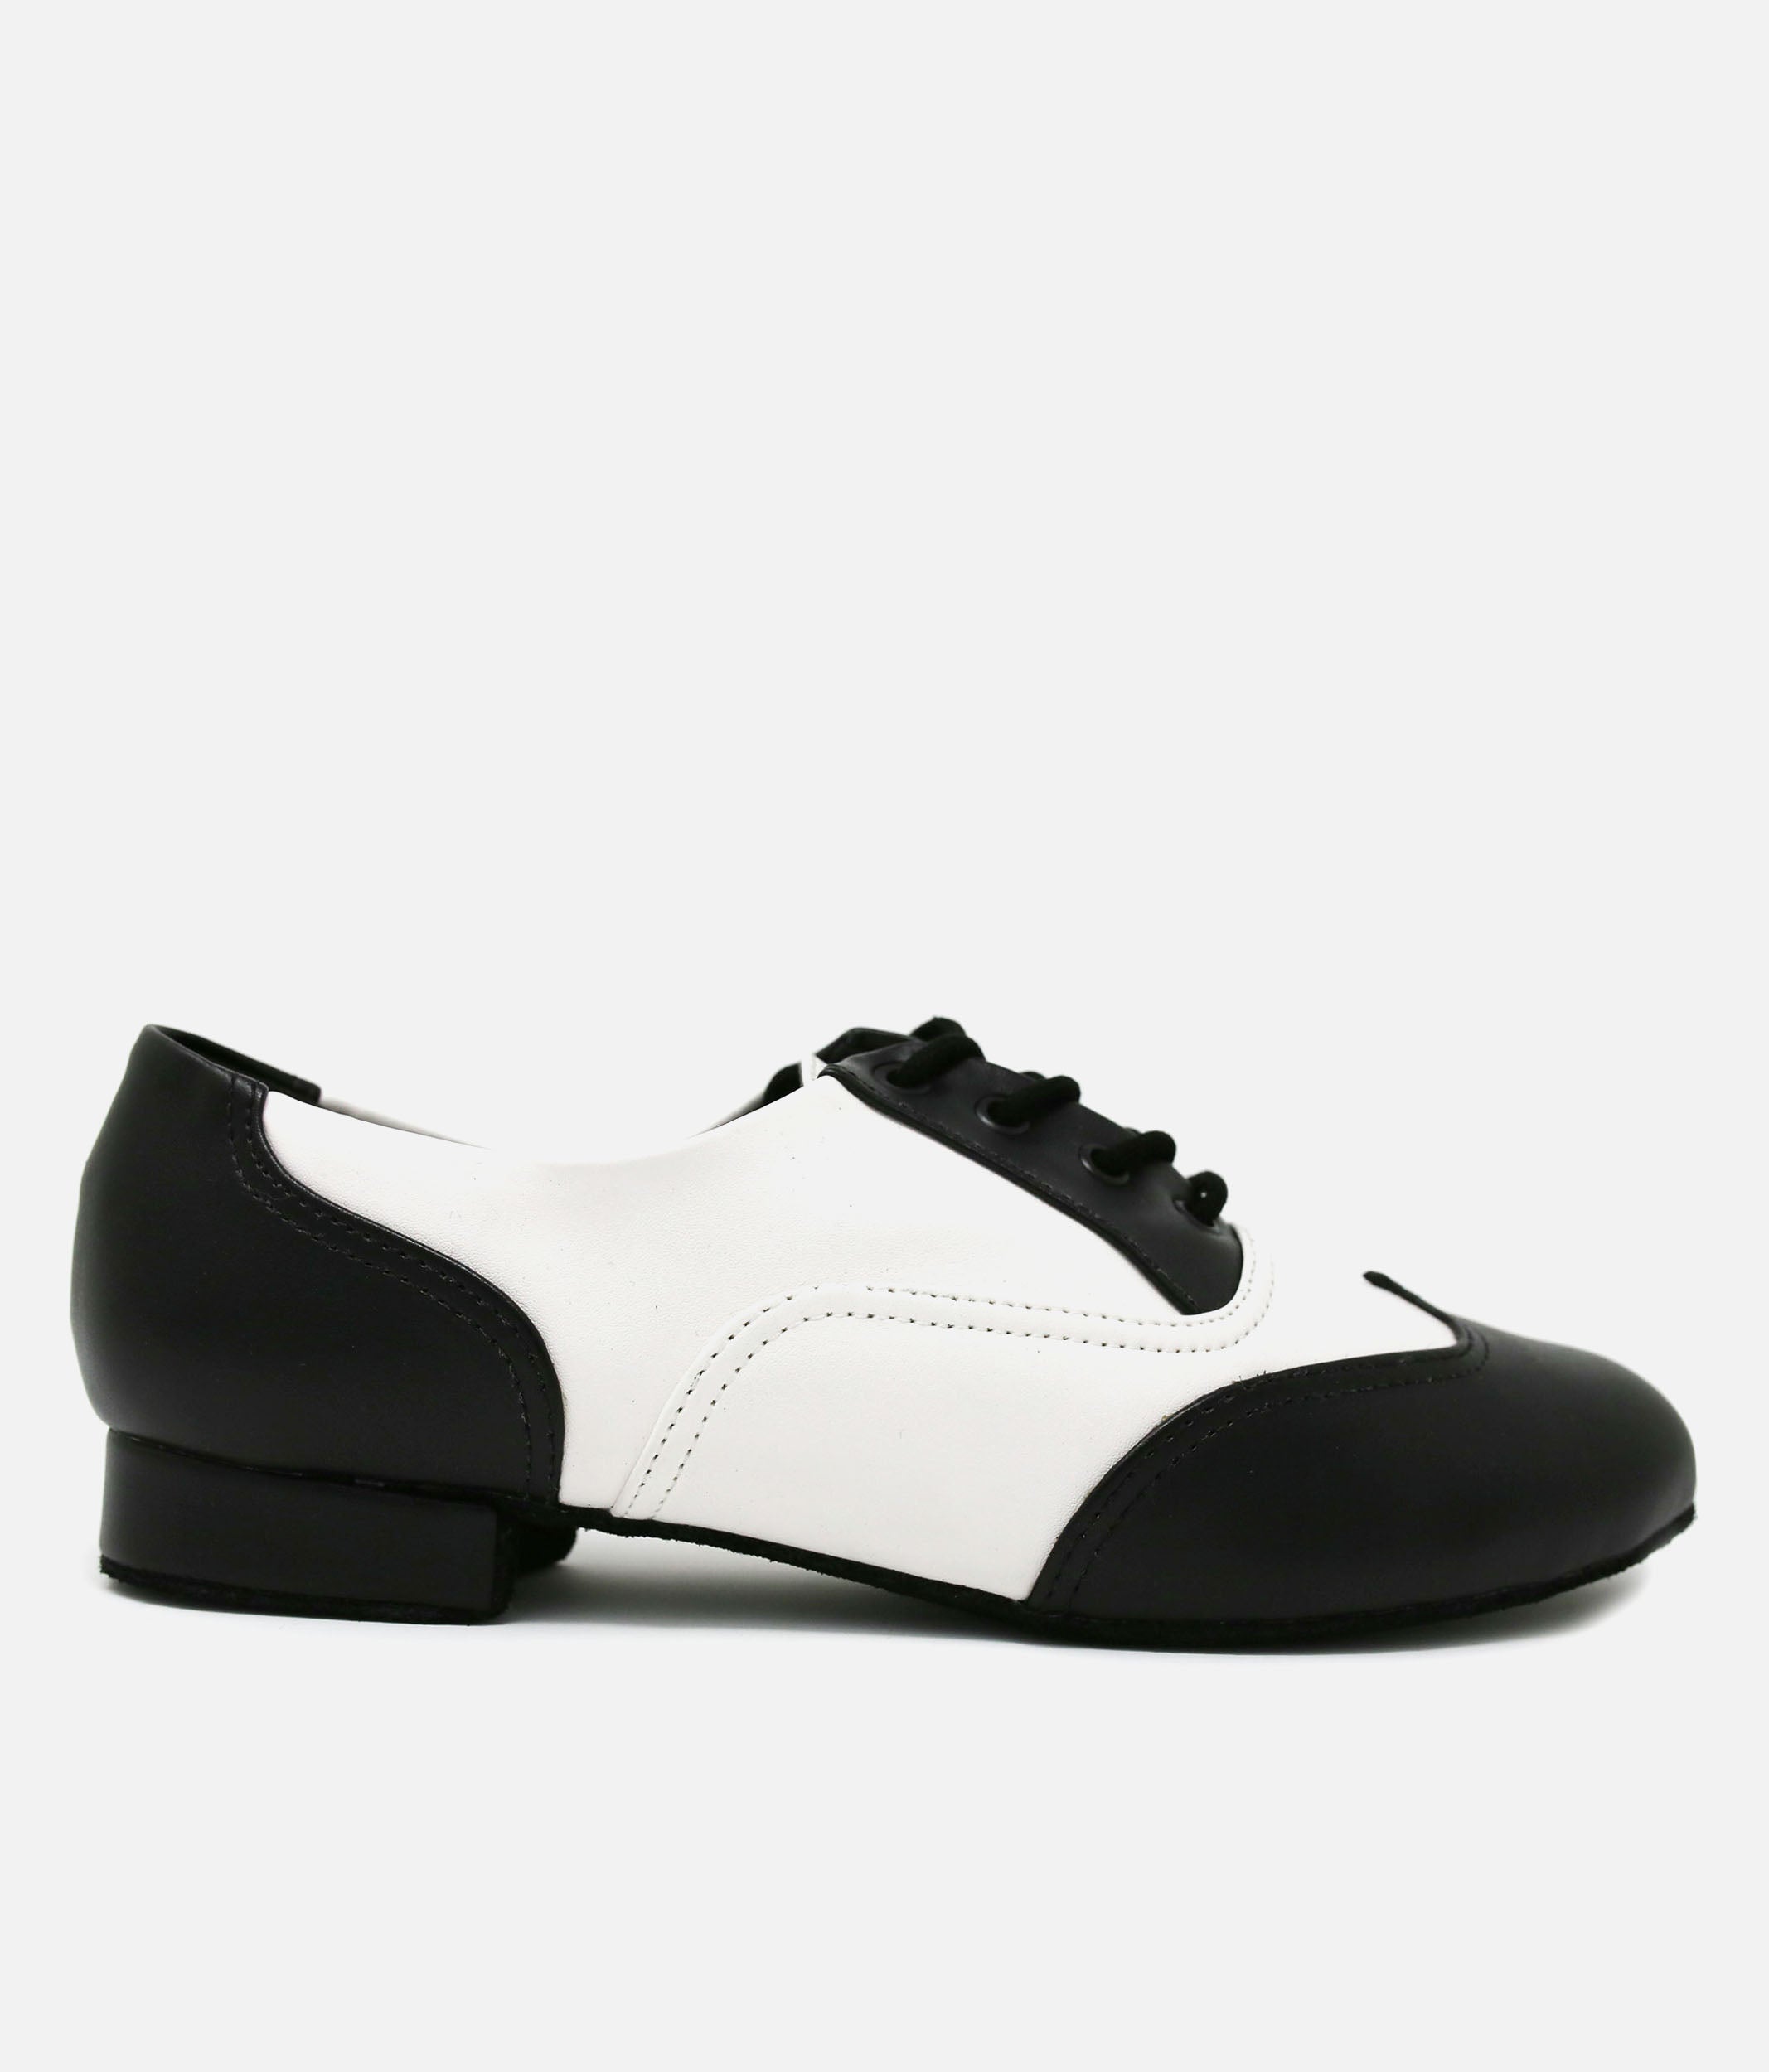 Practice Ballroom Shoes, Oxford Style  - JZ 97